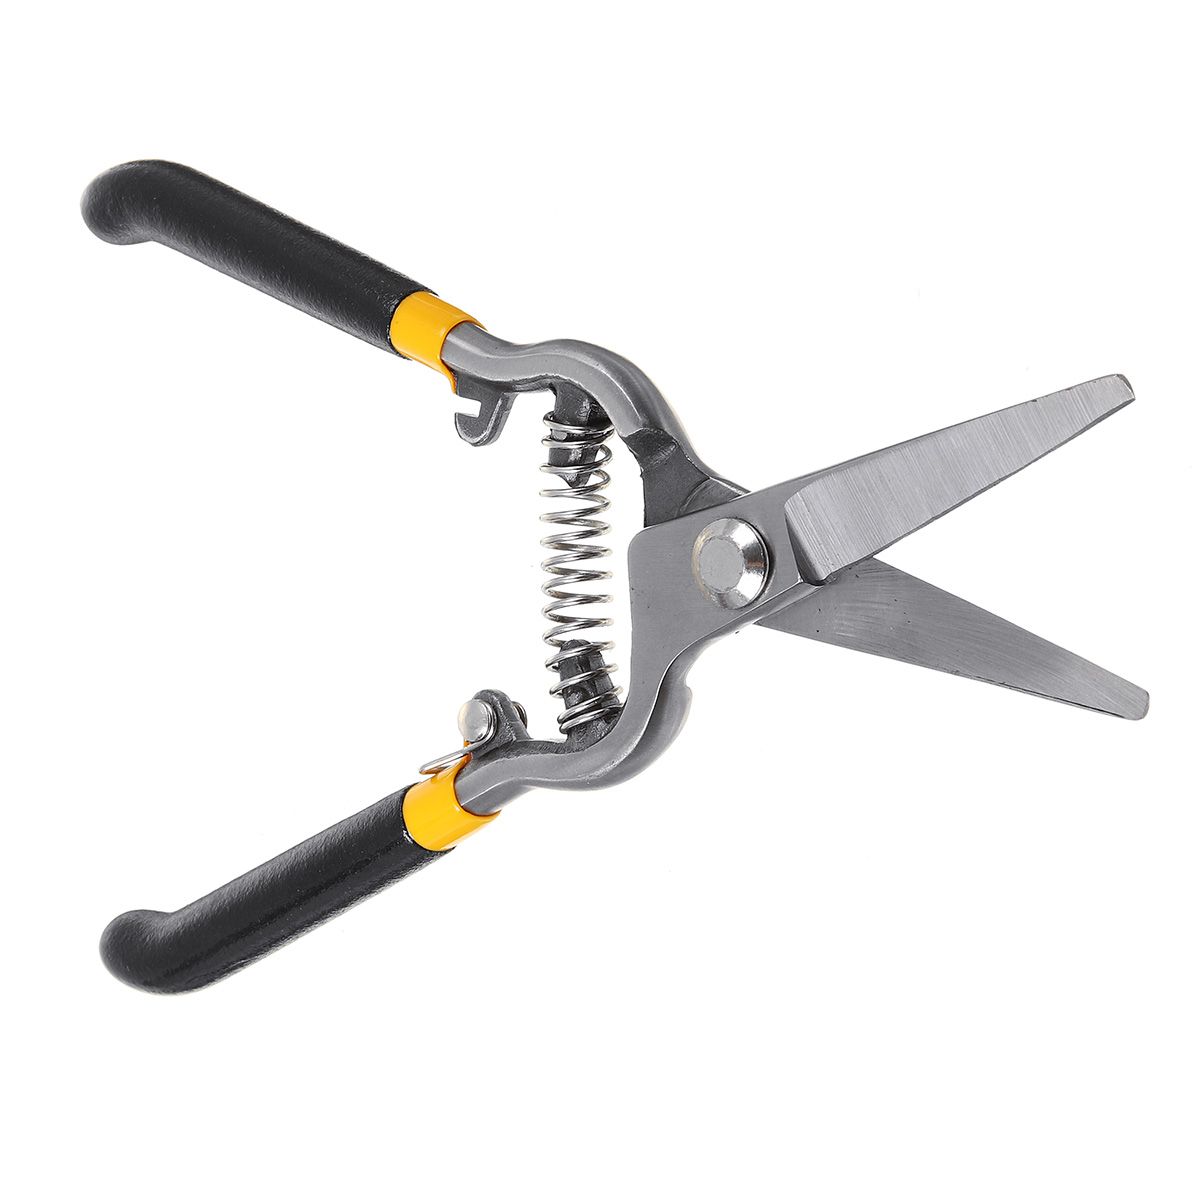 Find 8 Gardening Garden Grass Edge Edging Lawn Pruner Pruning Hand Shears Scissors for Sale on Gipsybee.com with cryptocurrencies